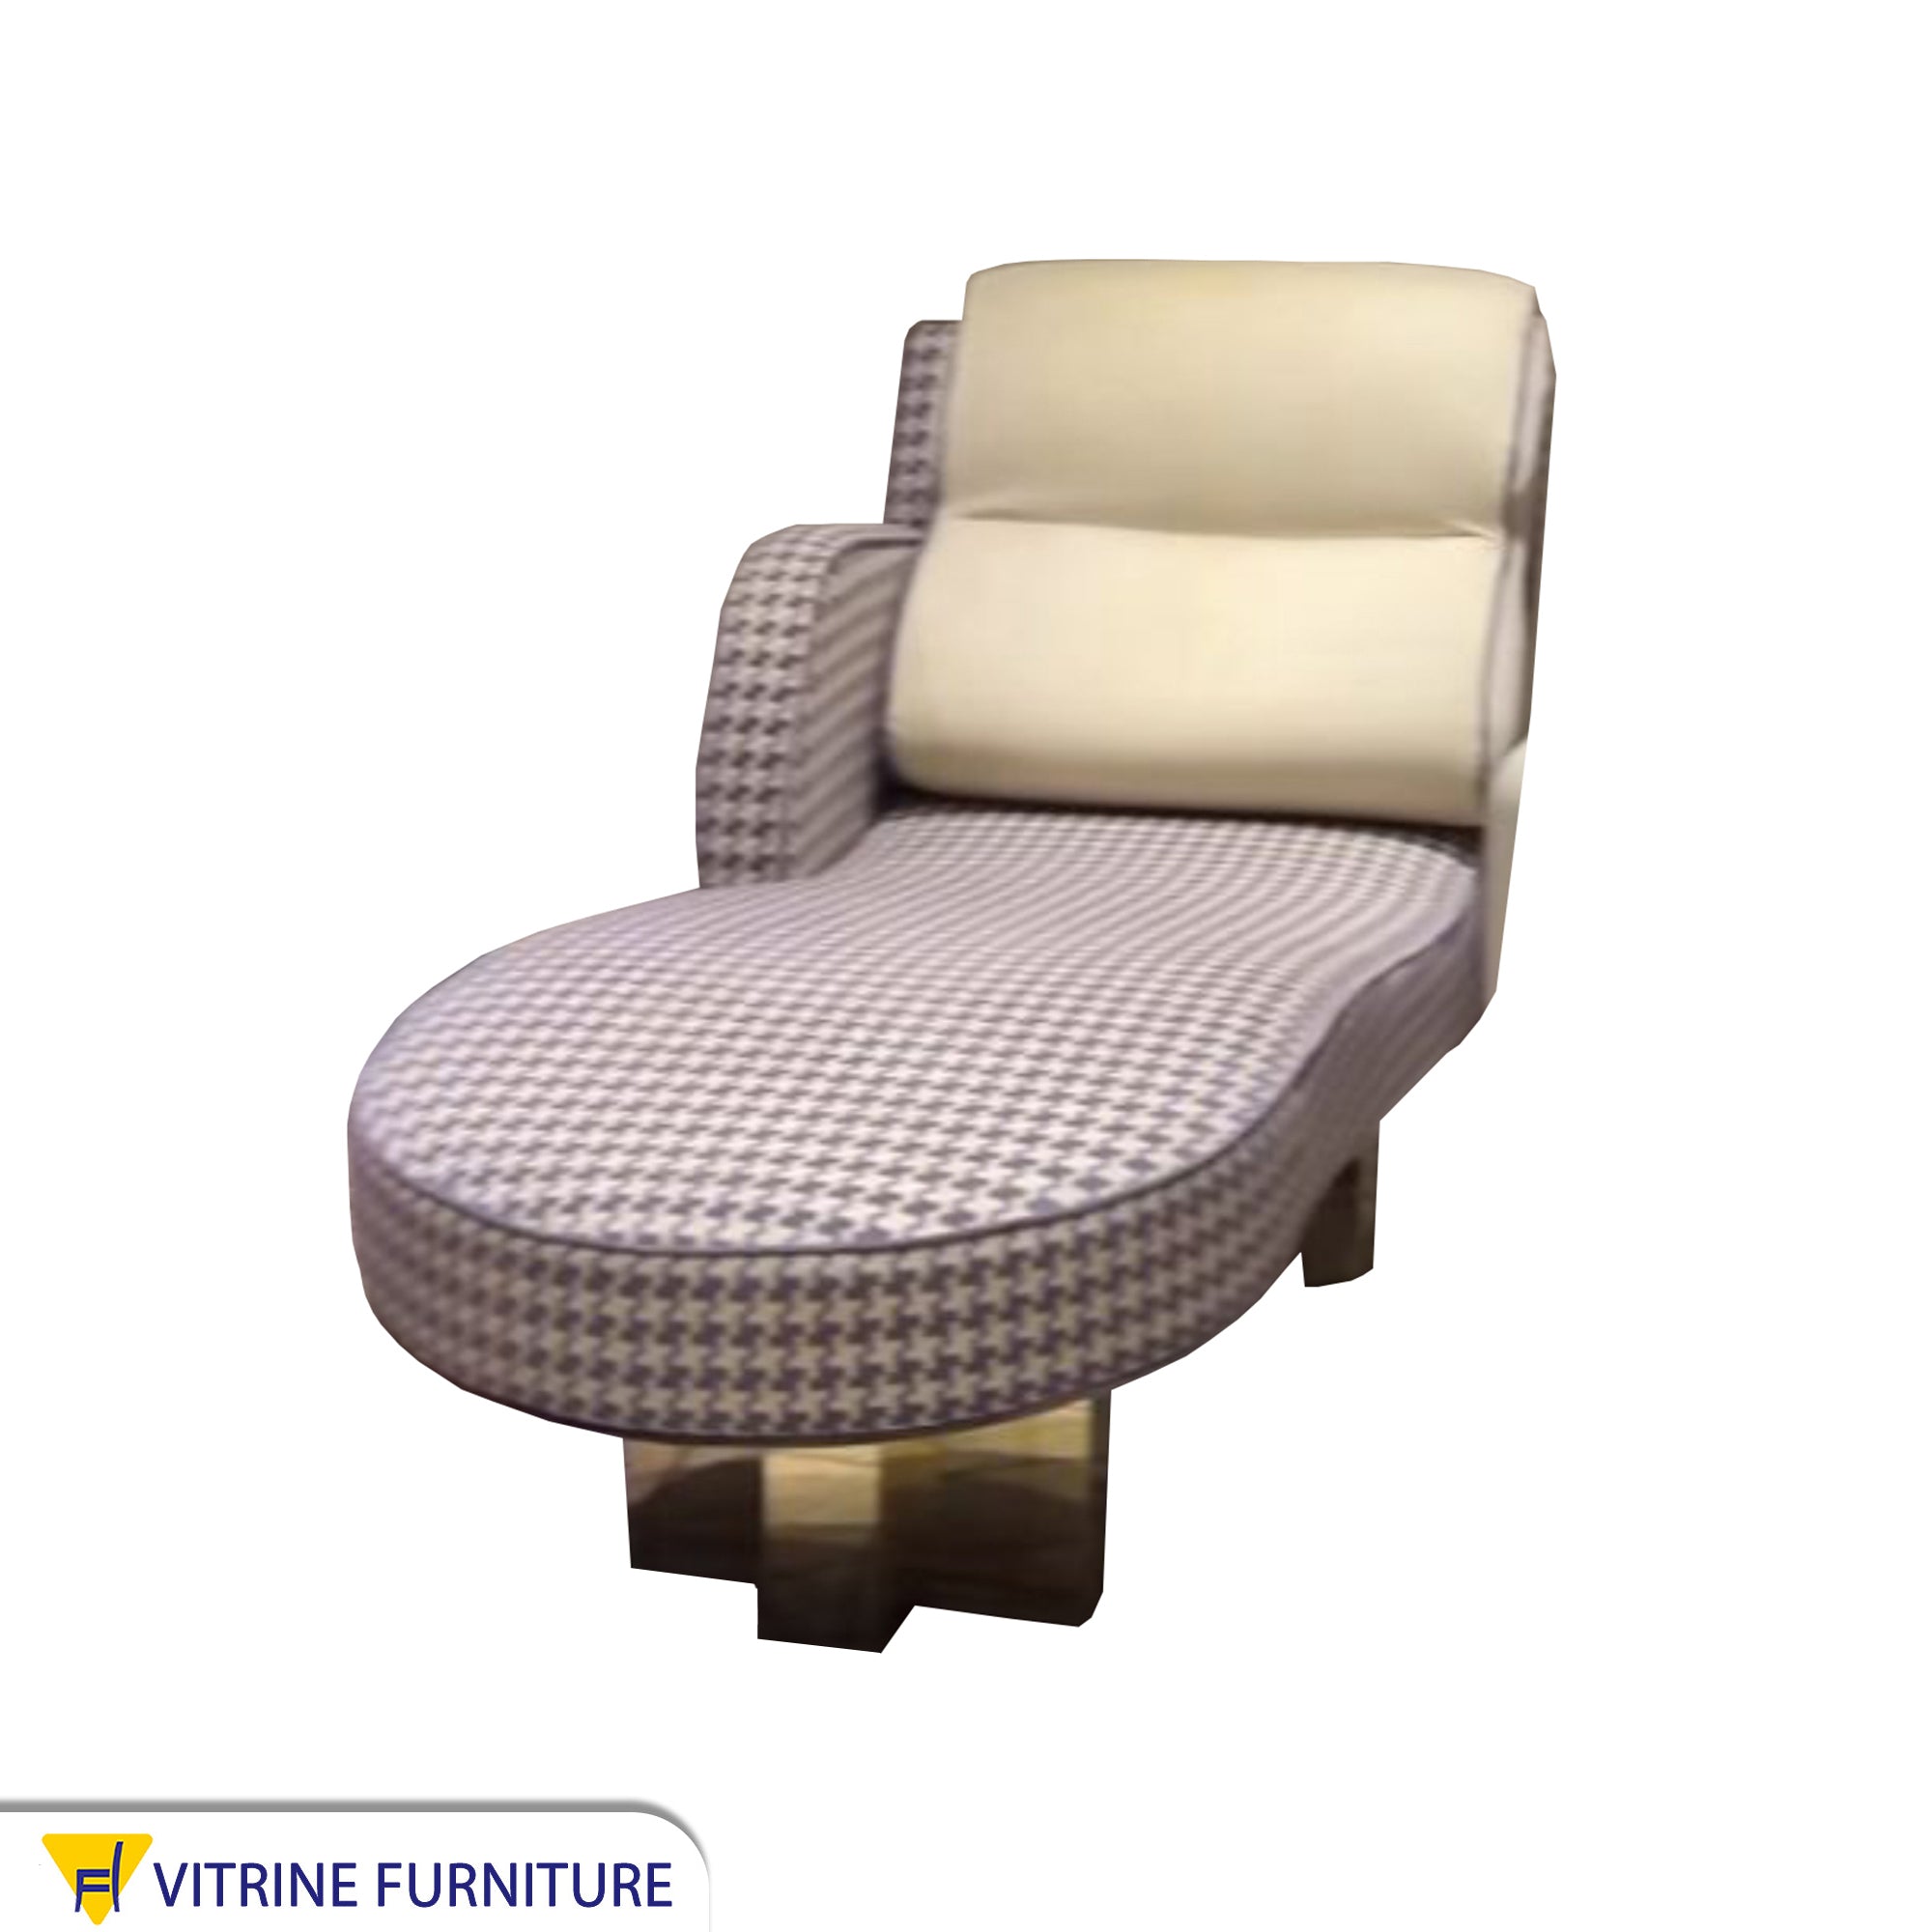 Relaxing chaise longue with reclining backrest